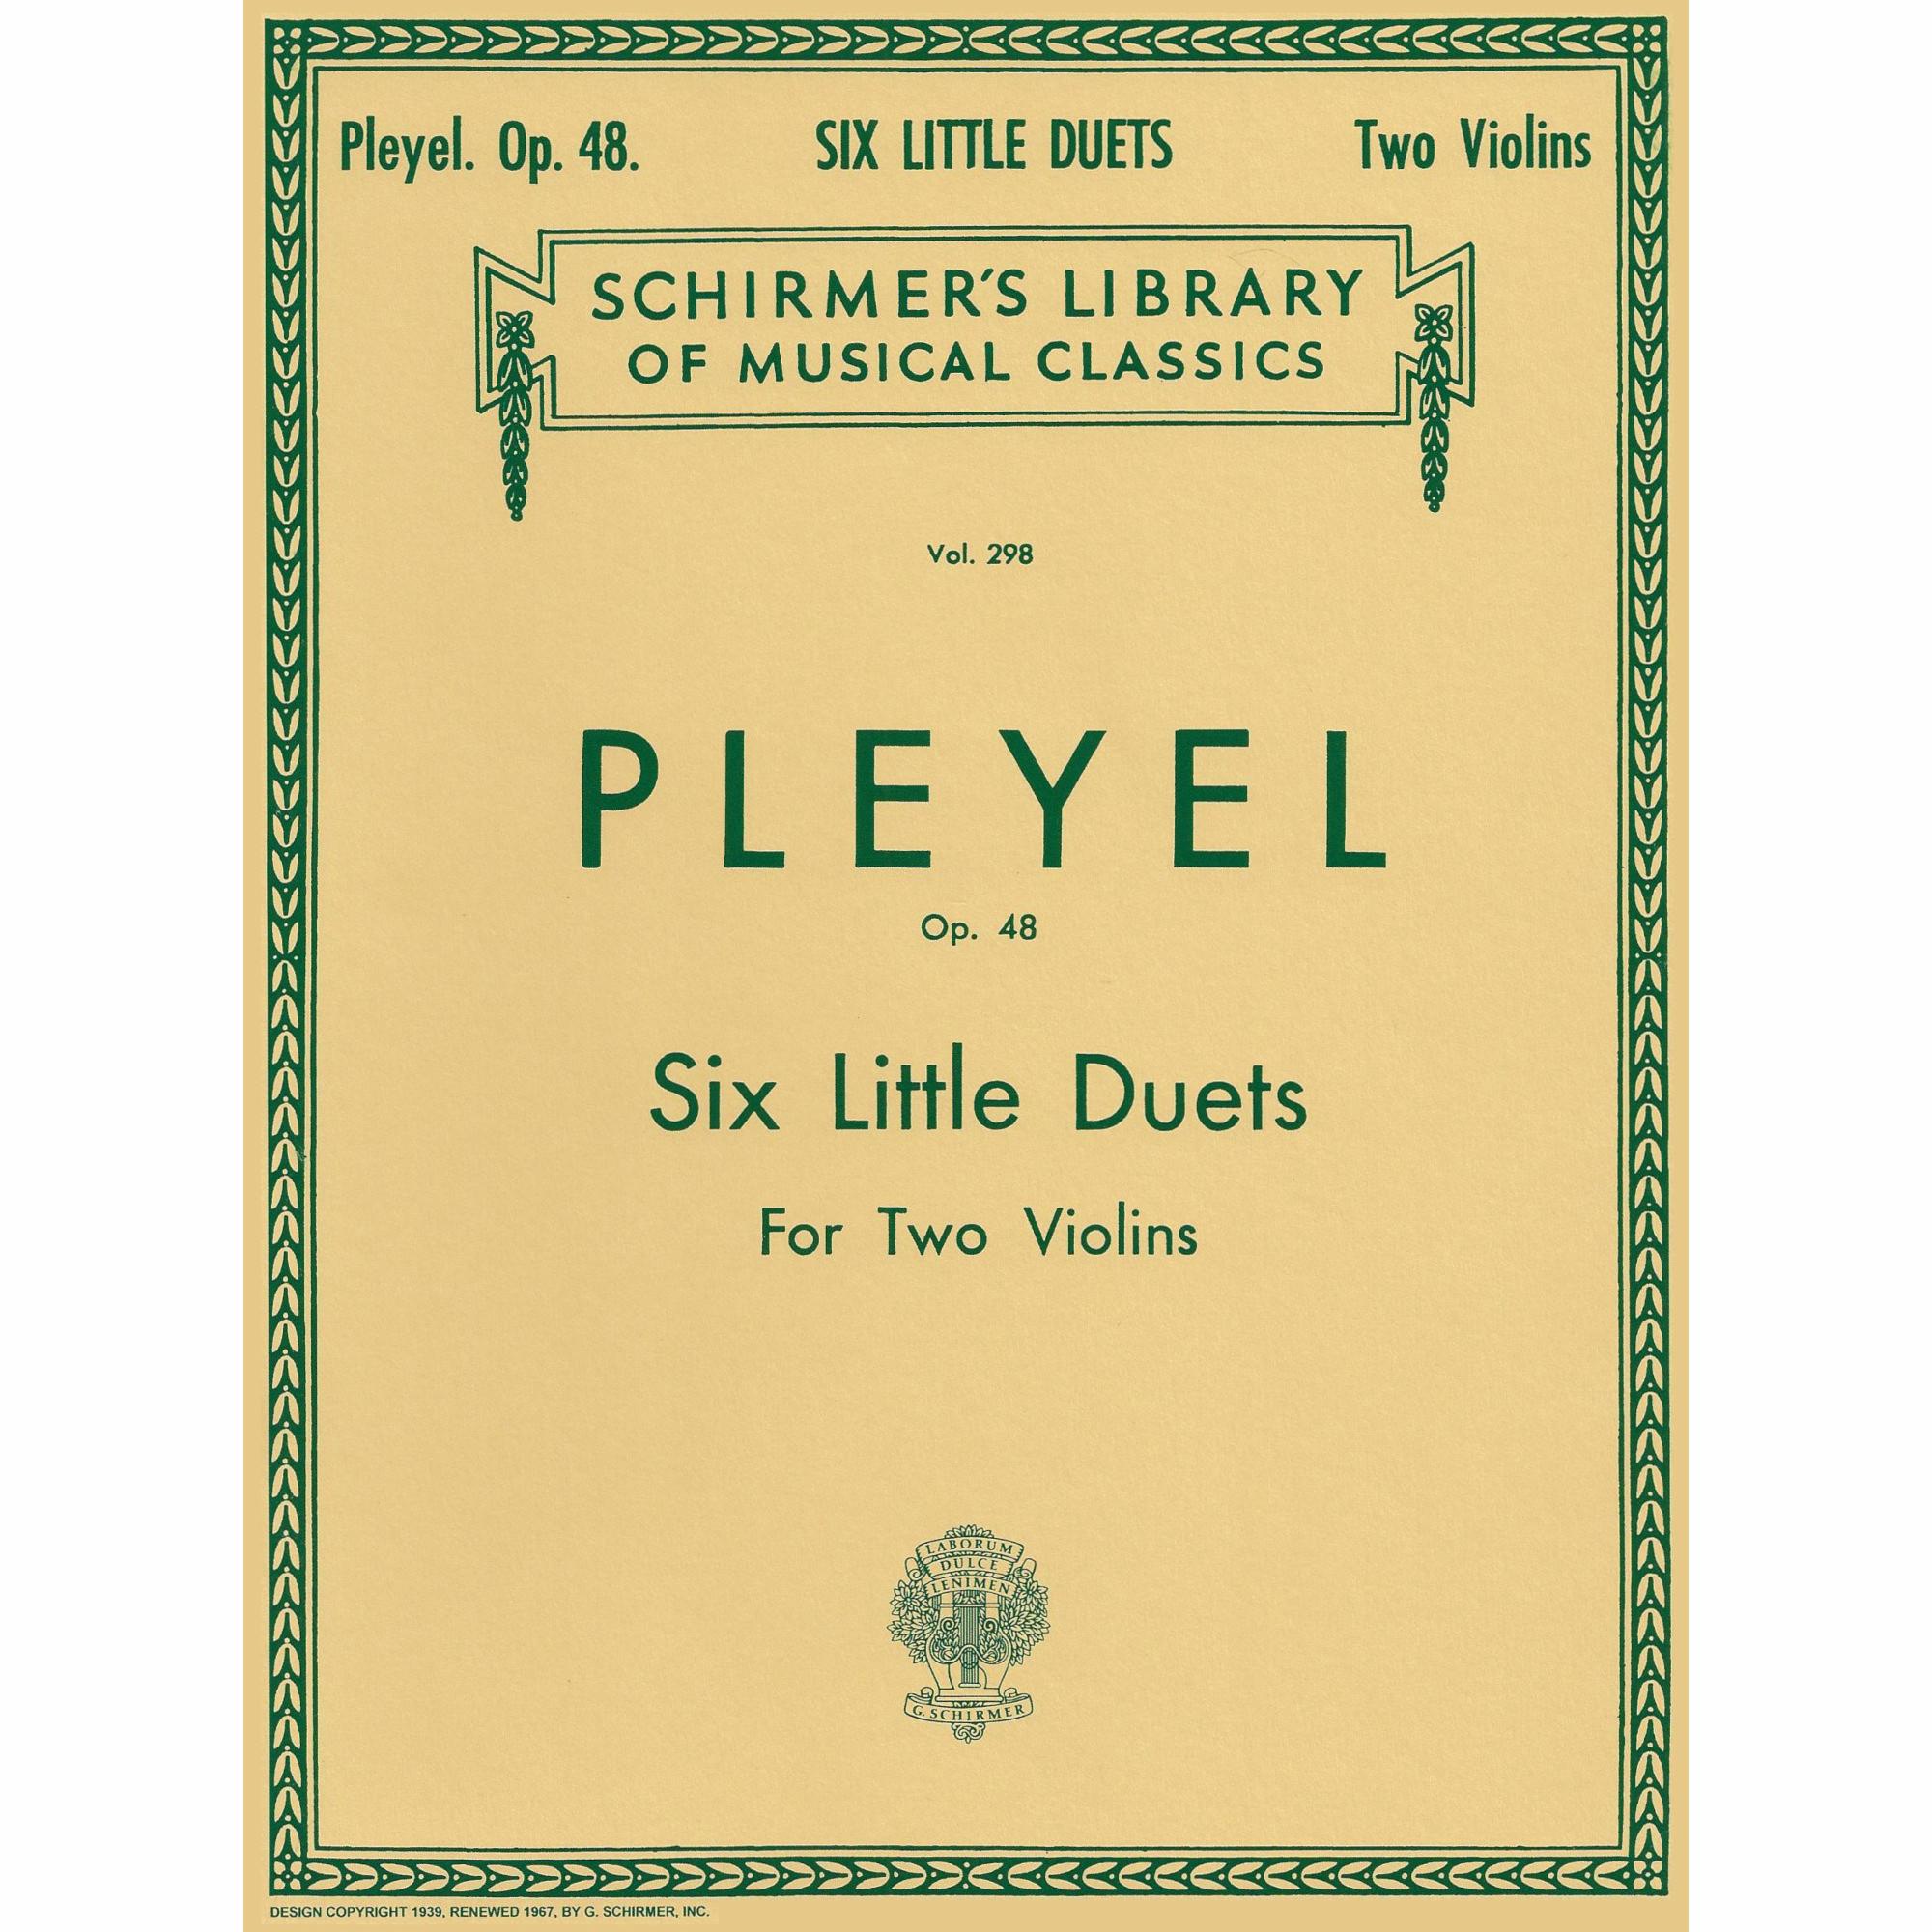 Pleyel -- Six Little Duets, Op. 48 for Two Violins